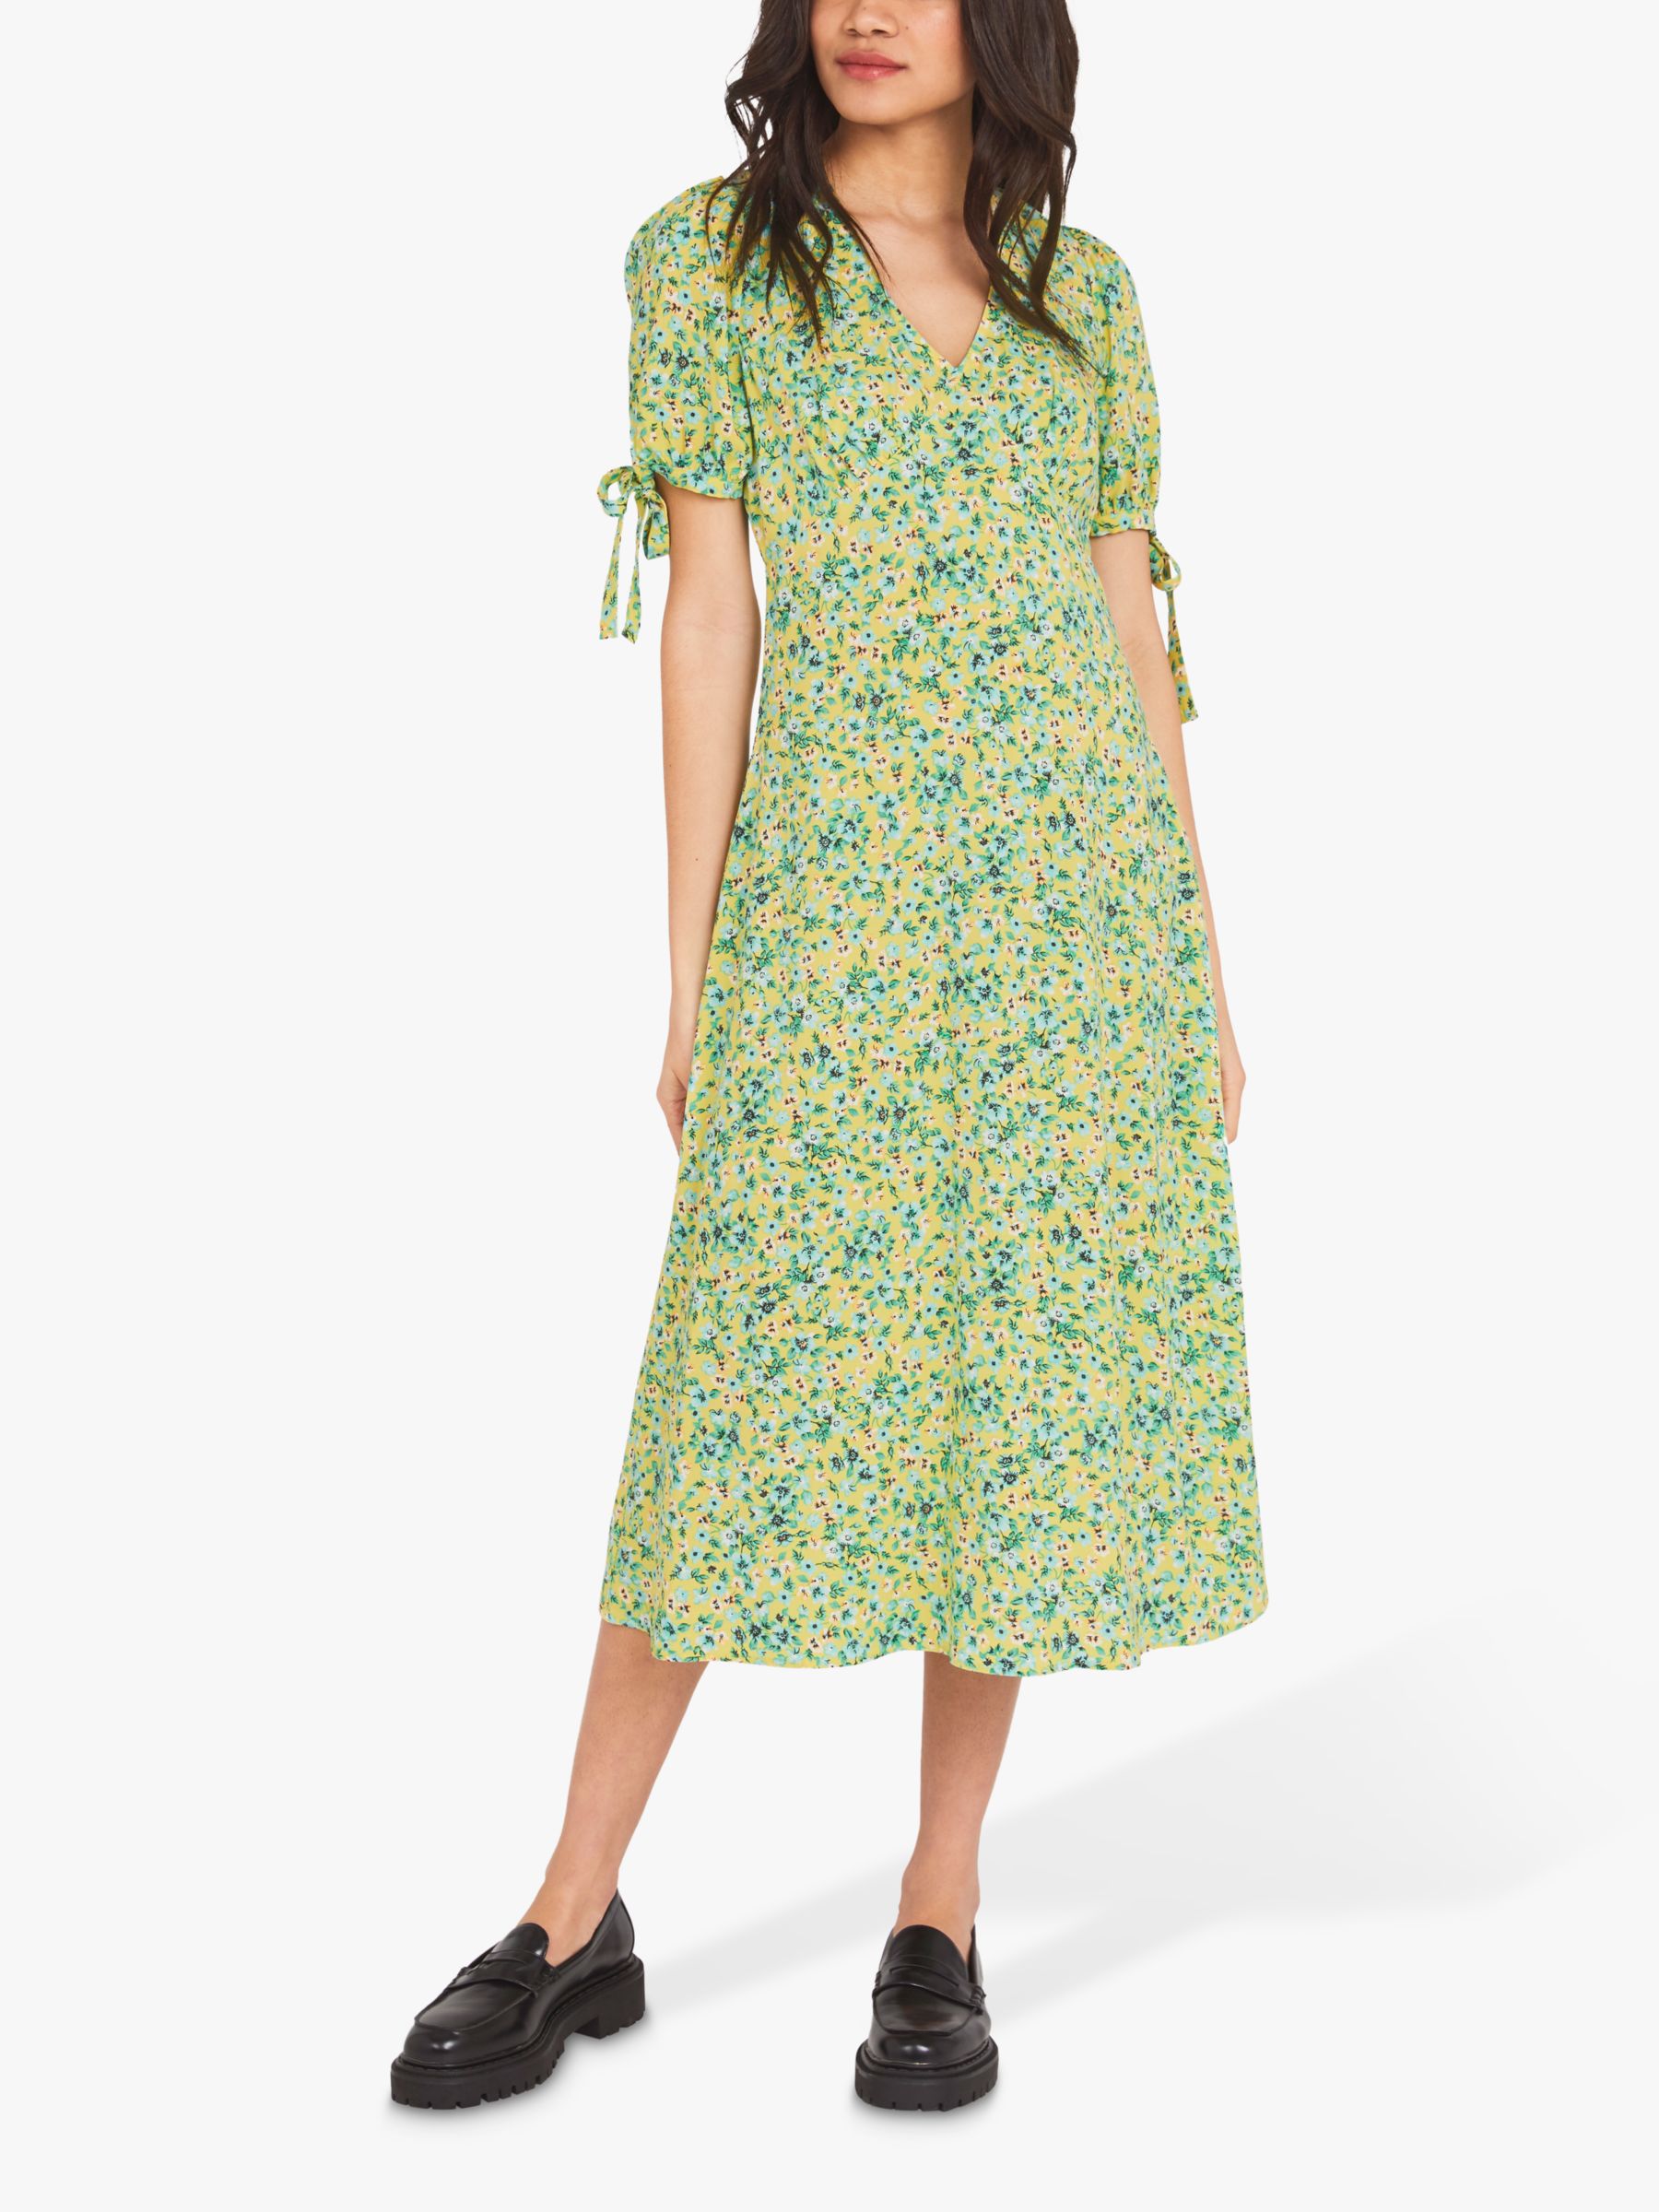 Finery Claire Sweet Pea Ditsy Print Dress, Green